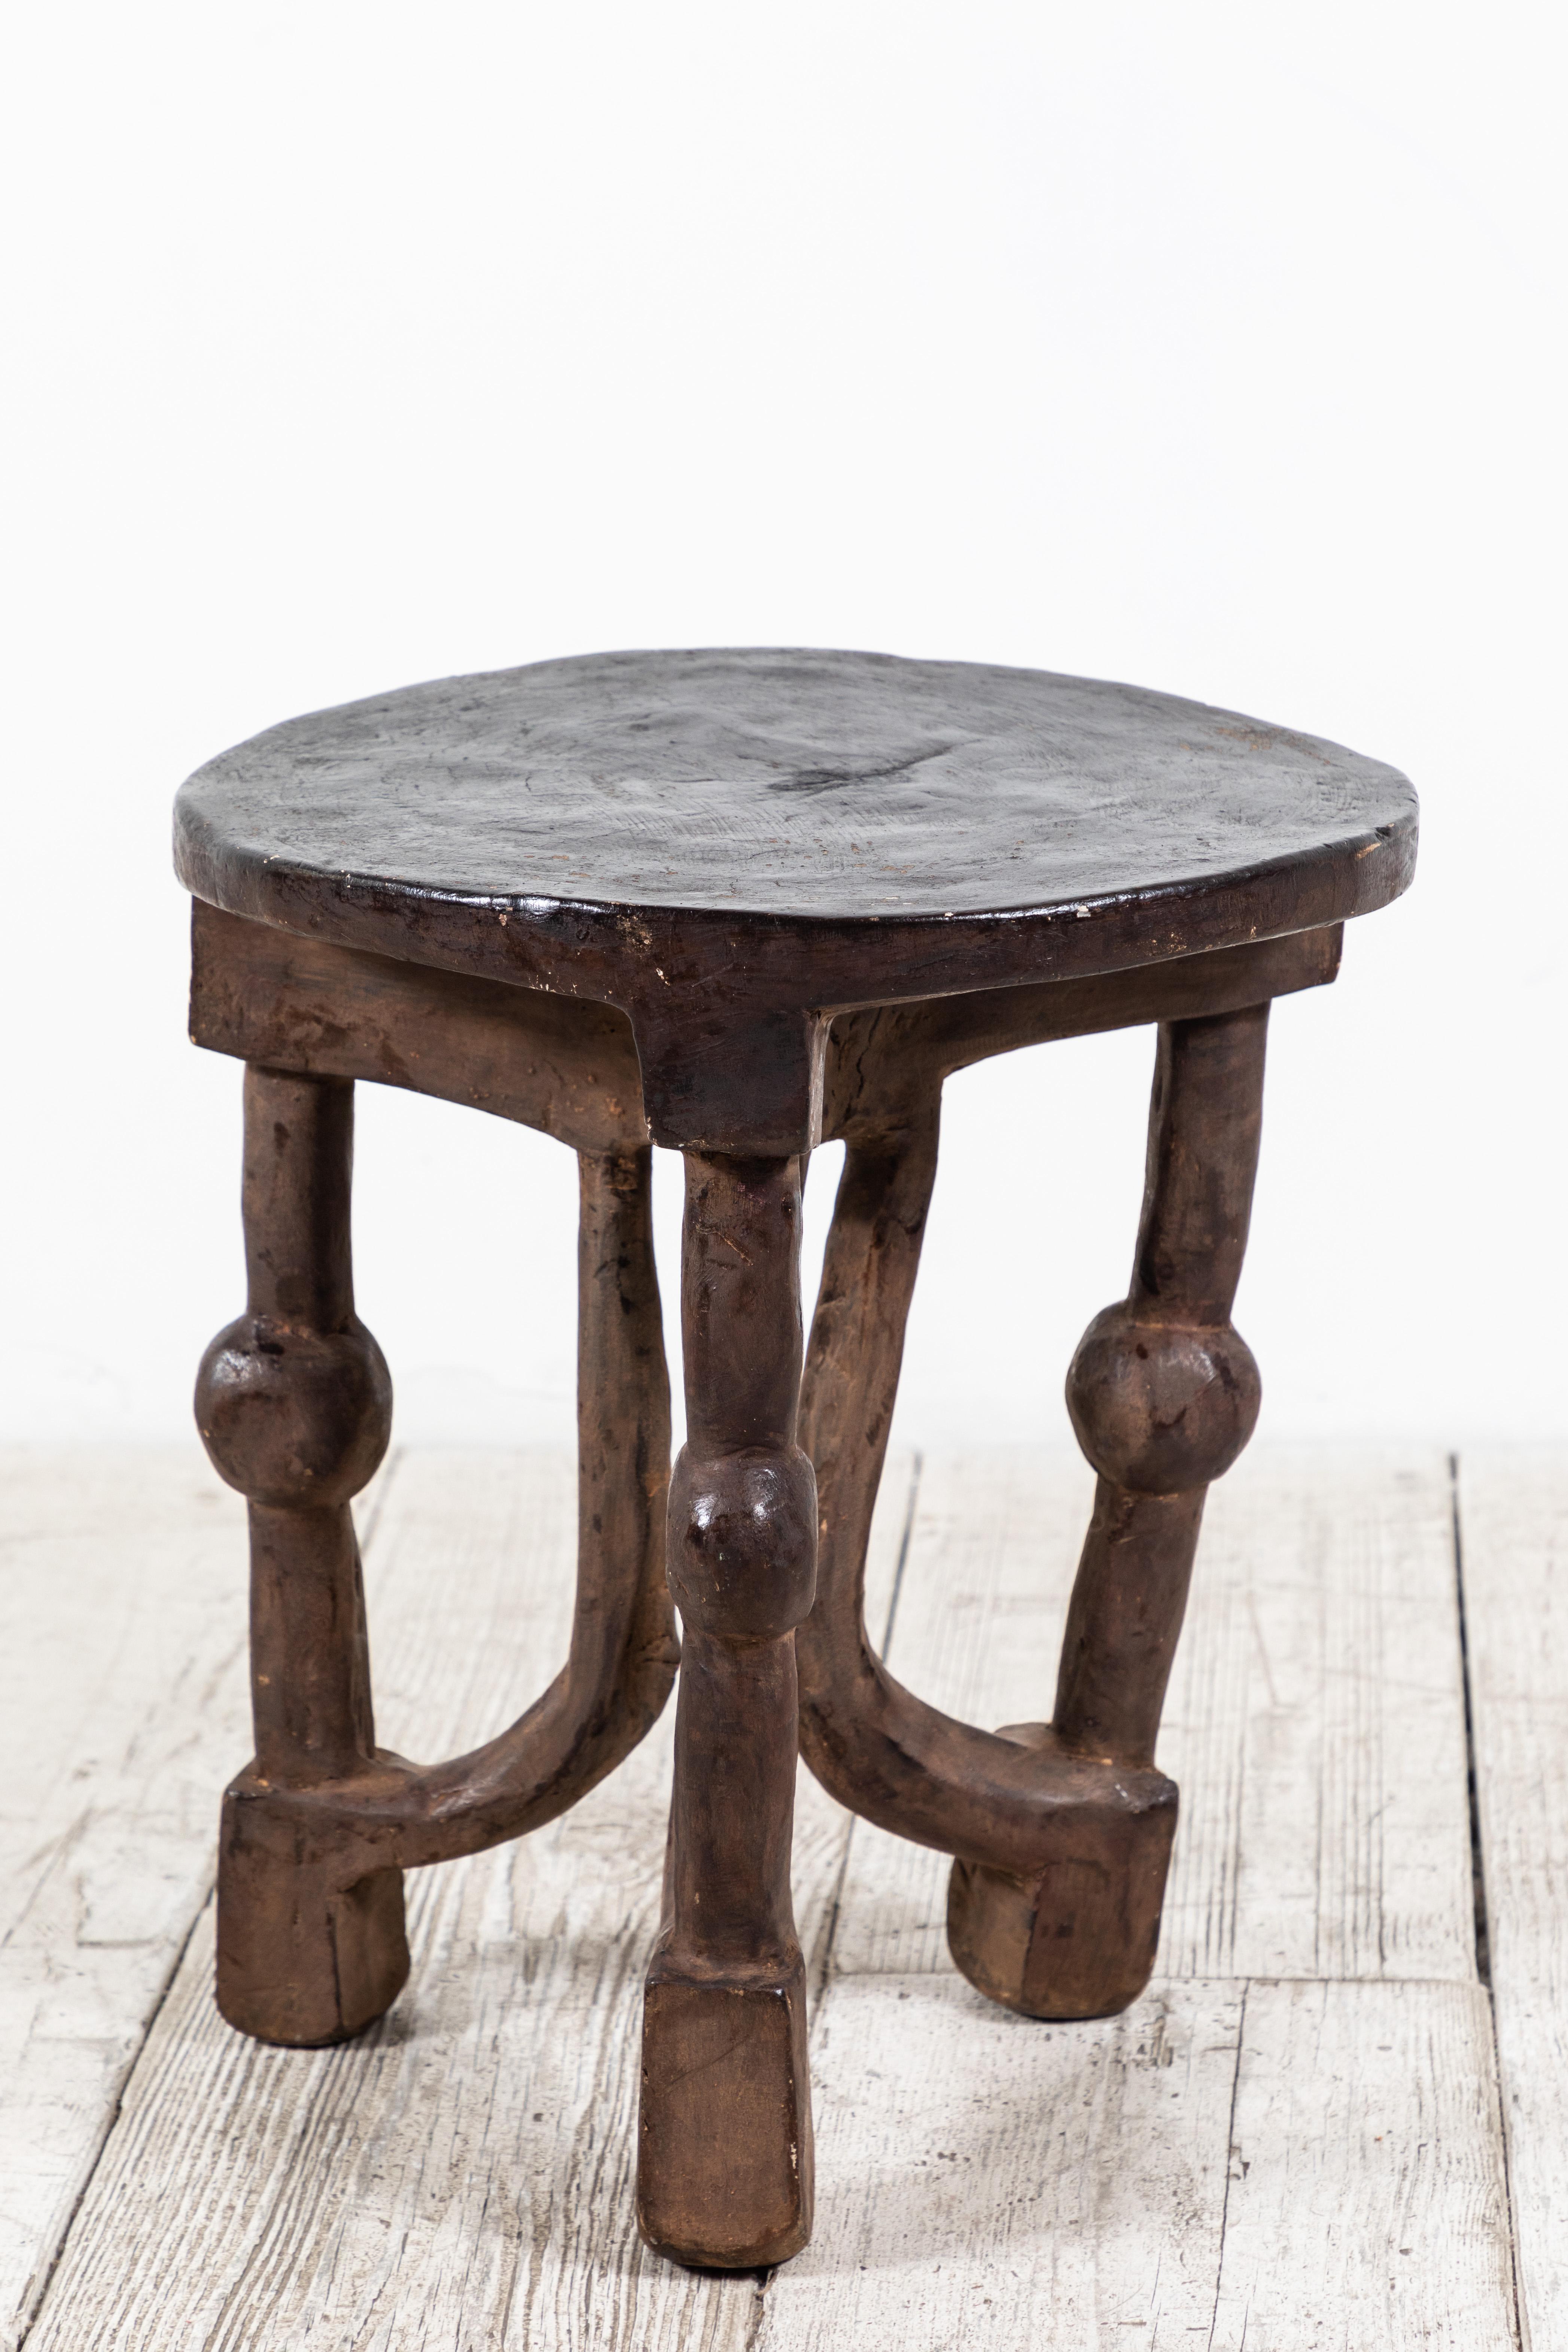 Solid round African stool with unique carvings.